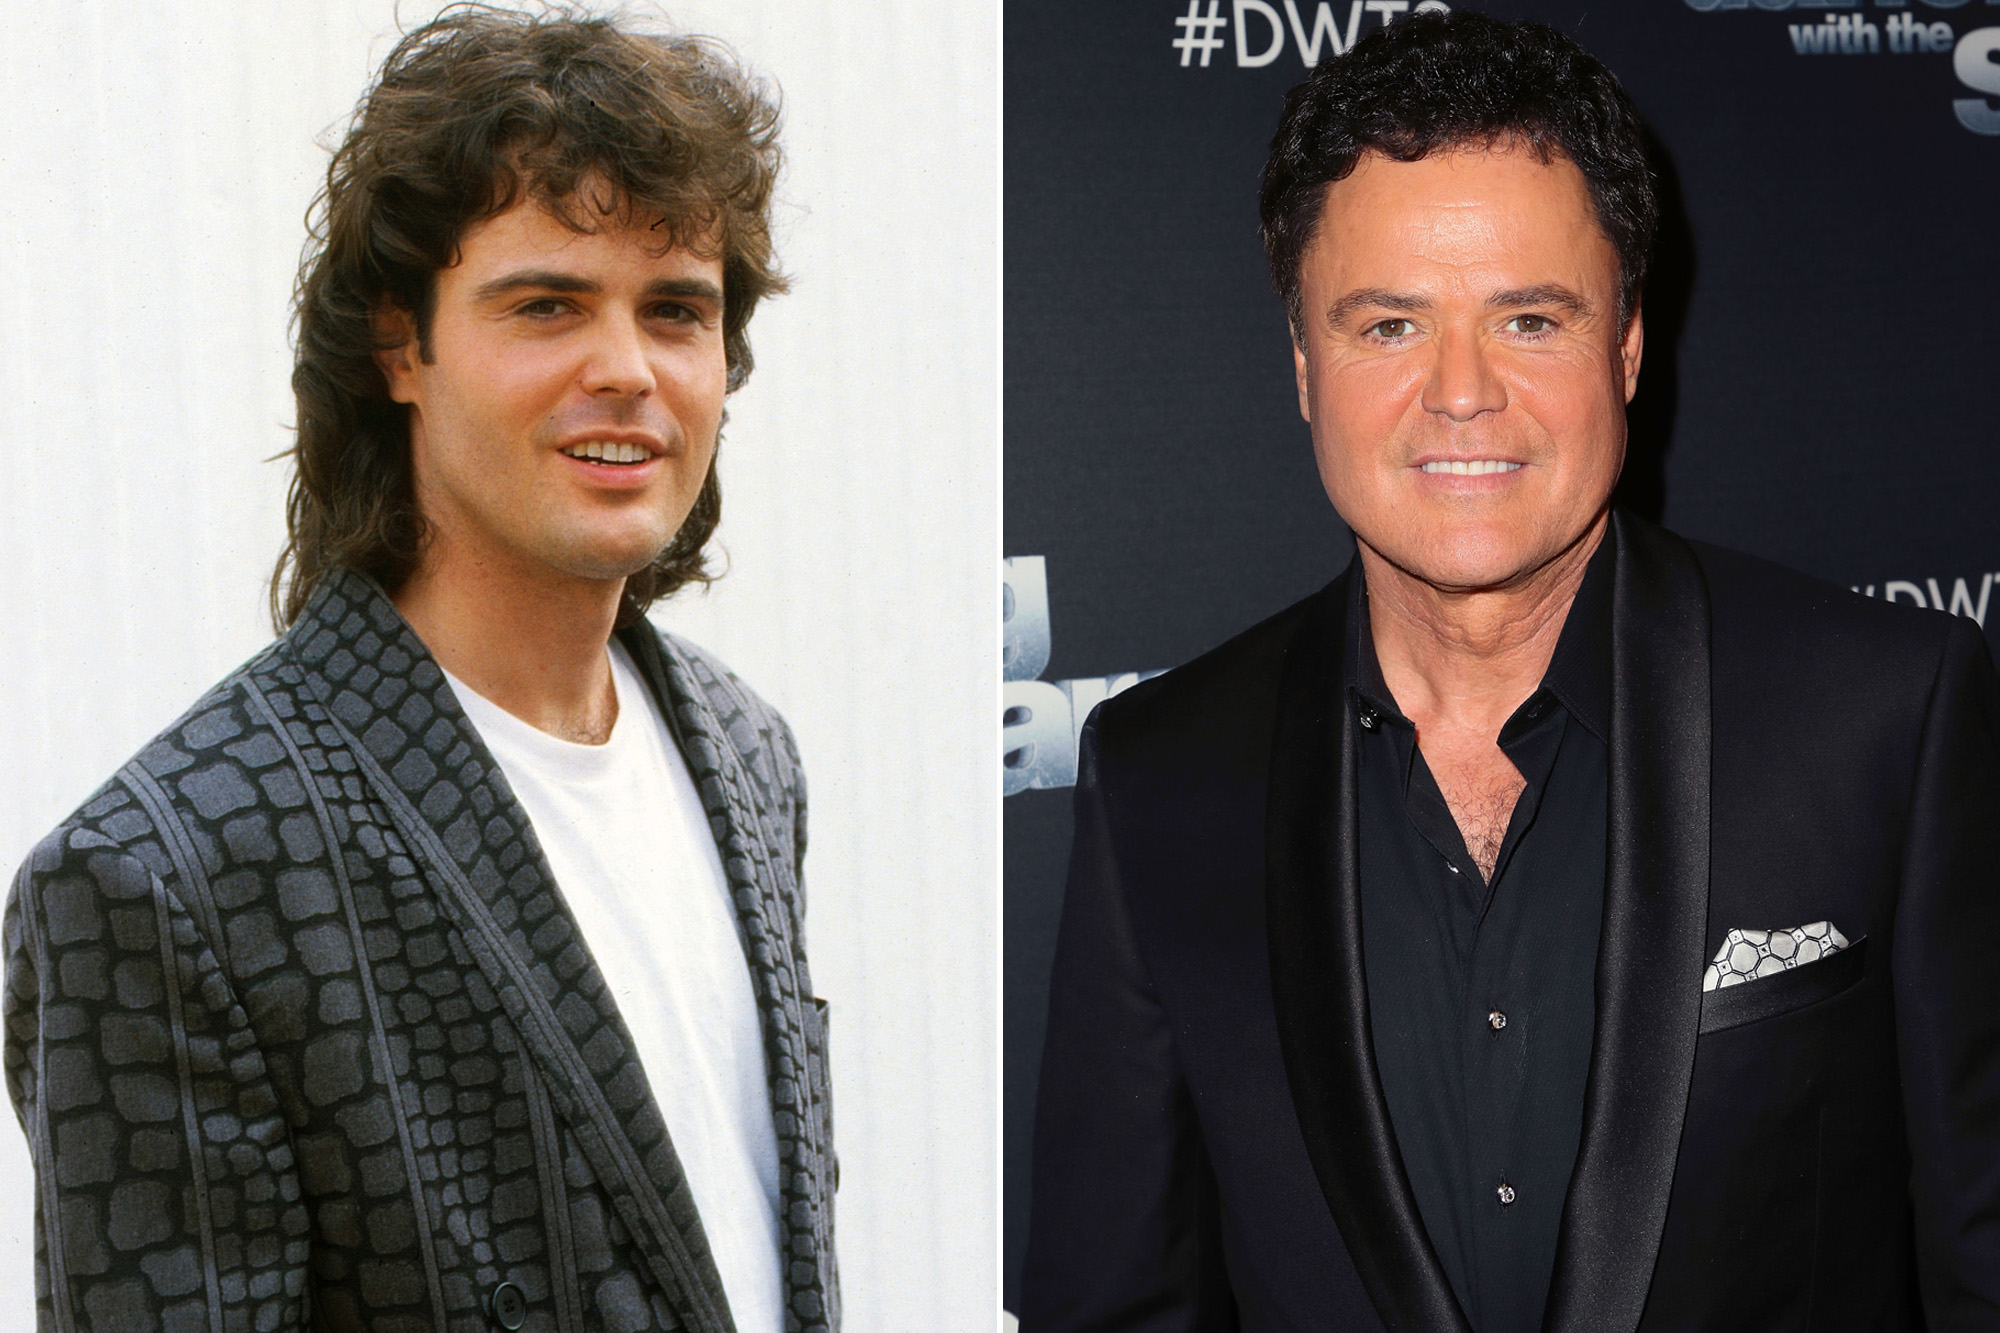 Donny Osmond on 'Puppy Love,' Michael Jackson and trashing a hotel room